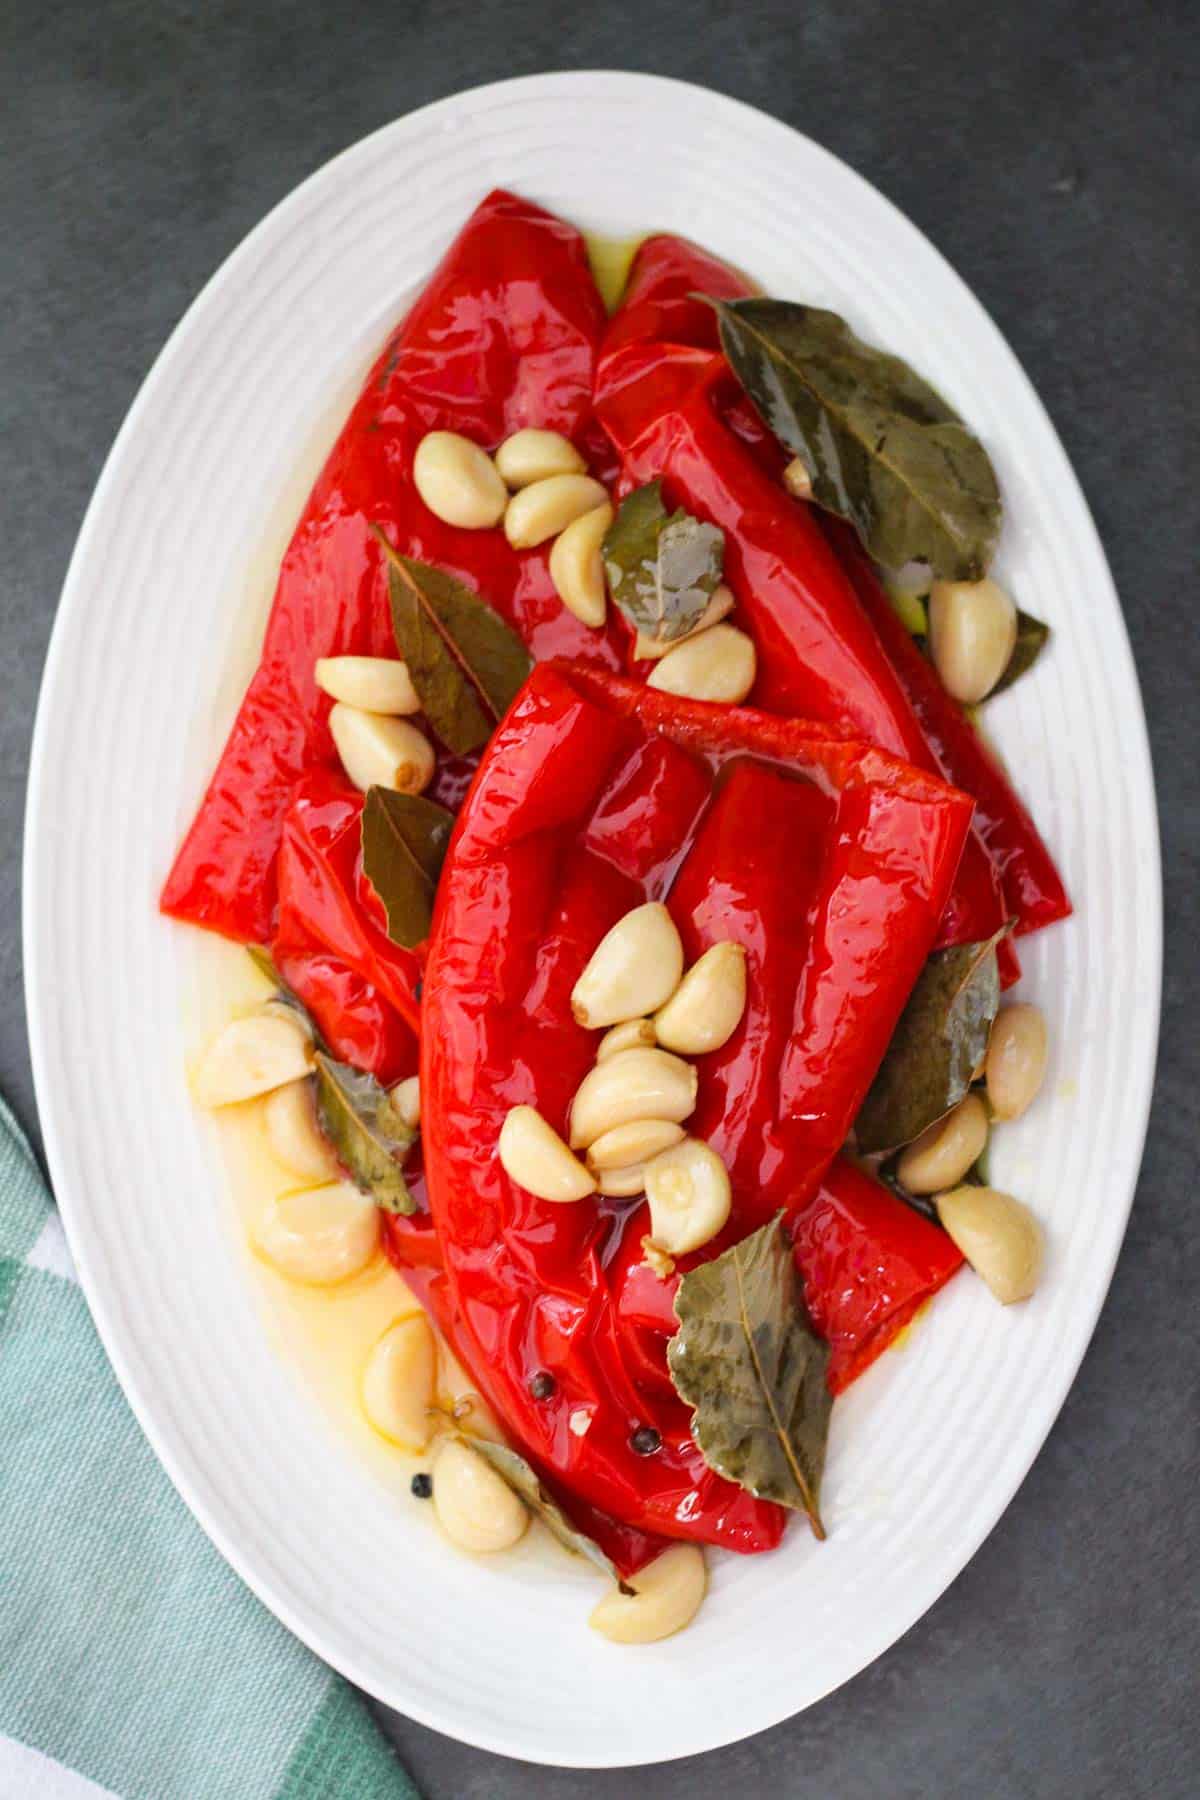 Albanian red peppers cooked in pressure cooker, they're called gogozhare. The peppers are shown served on a platter with garlic, pepper, and bay leaves. 